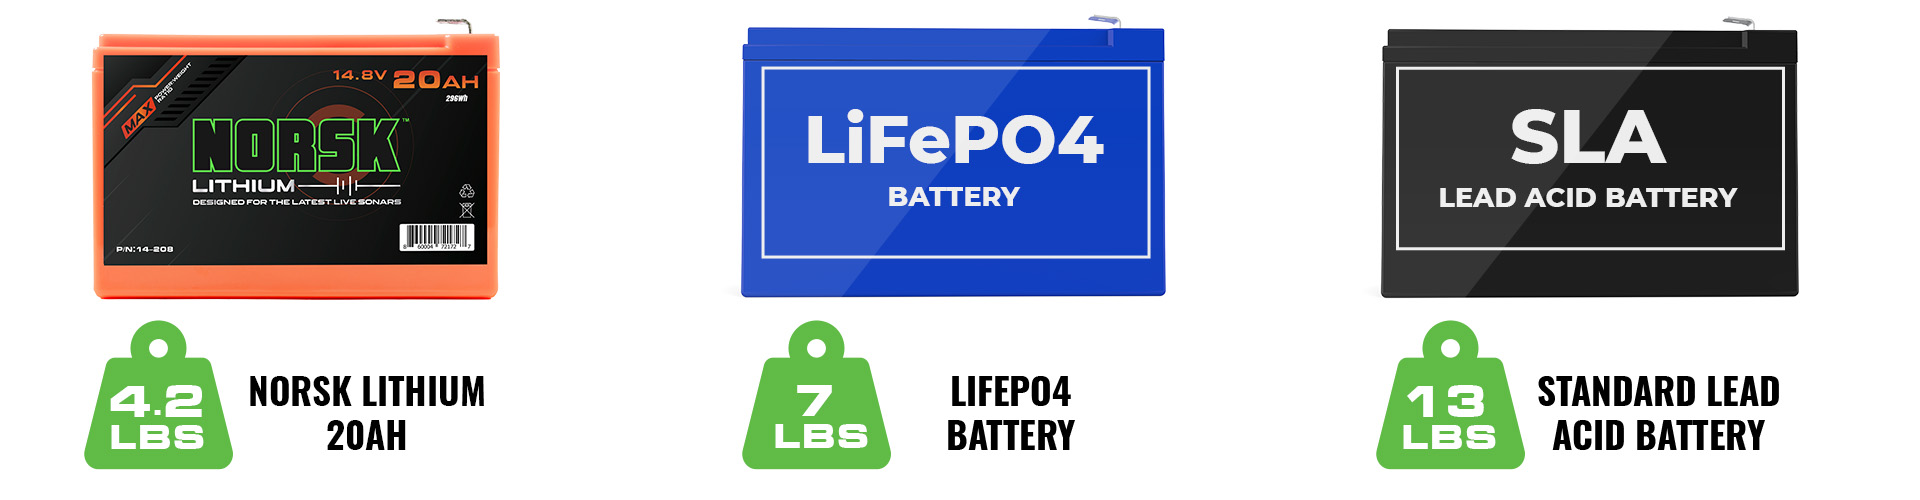 Norsk Lithium 20ah lithium battery and LIFEPO4 and Lead Acid Battery weight comparison